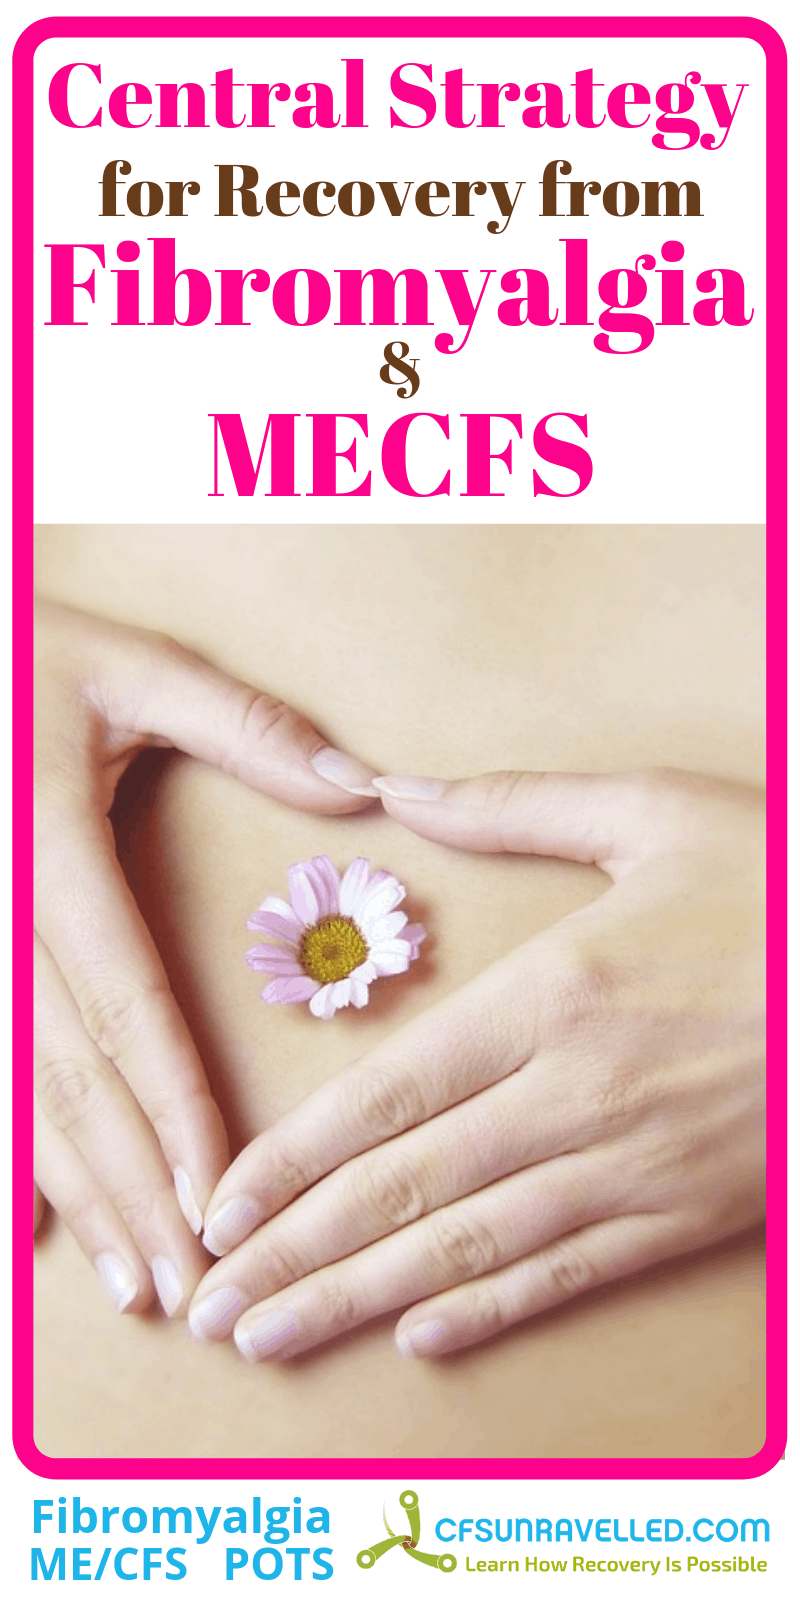 poster about central strategy for fibromyalgia me/cfs recovery with flower in bellybutton